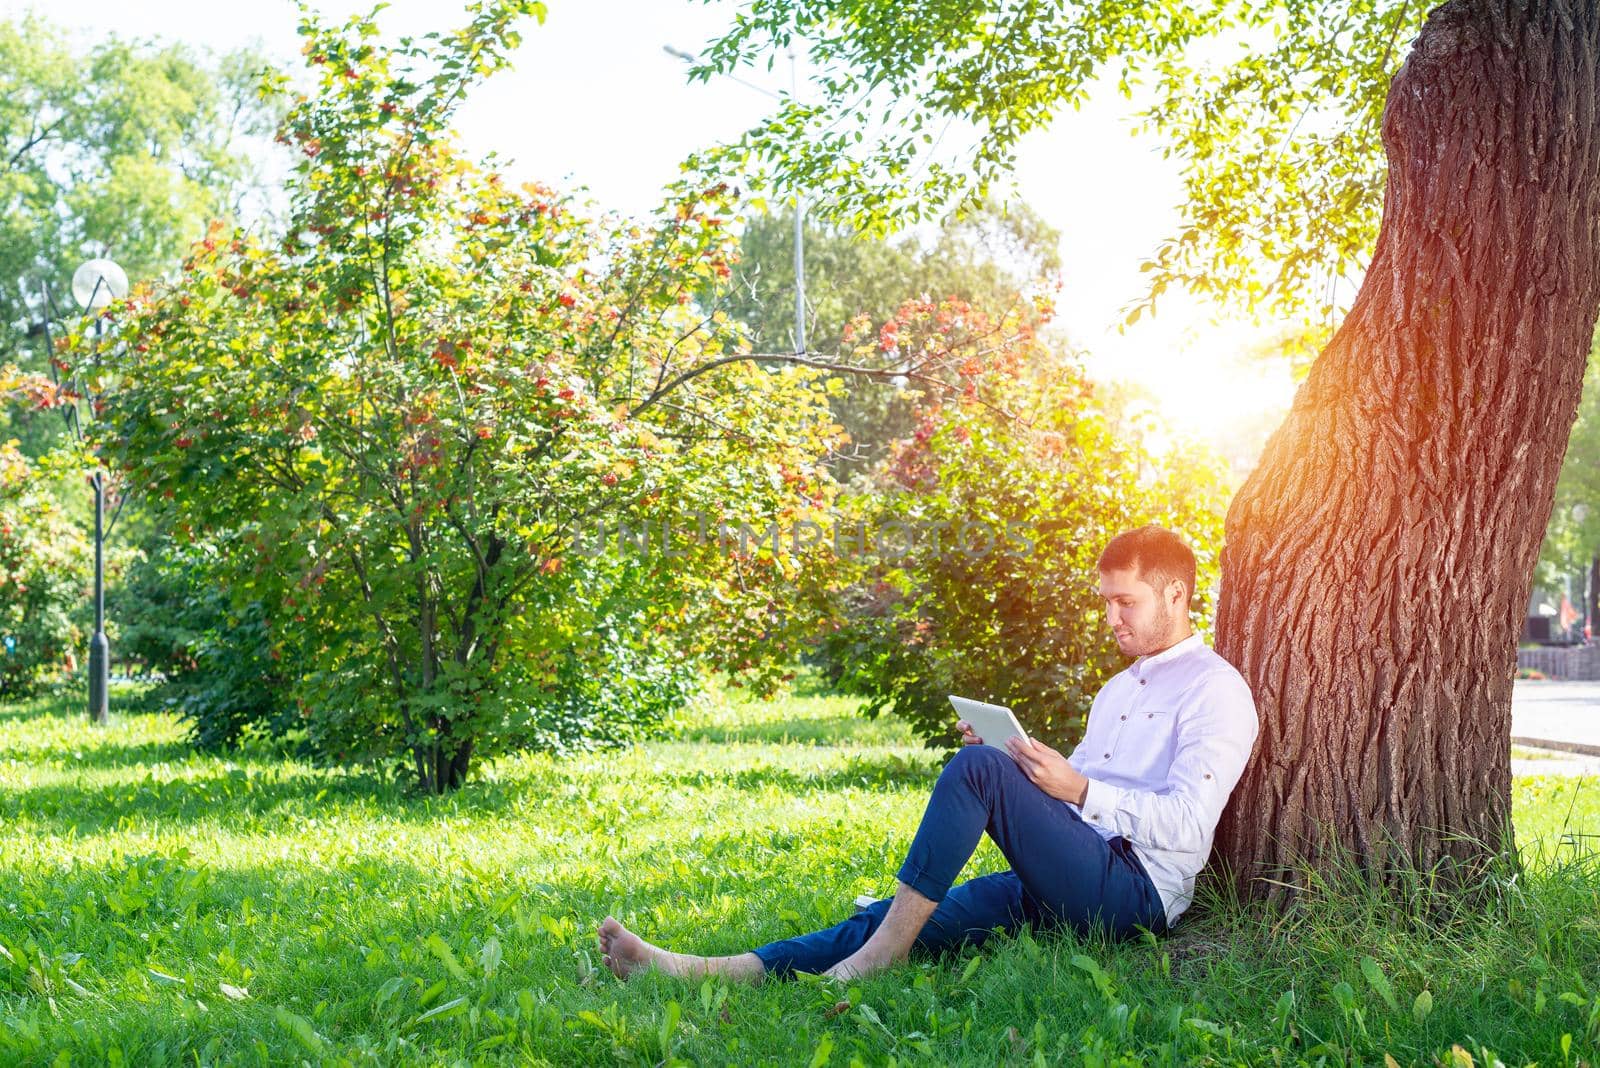 Young man using tablet computer under tree in park on sunny day. Handsome businessman looking at tablet screen. Calm man sitting on green grass leaning against tree. Mobile communication concept.